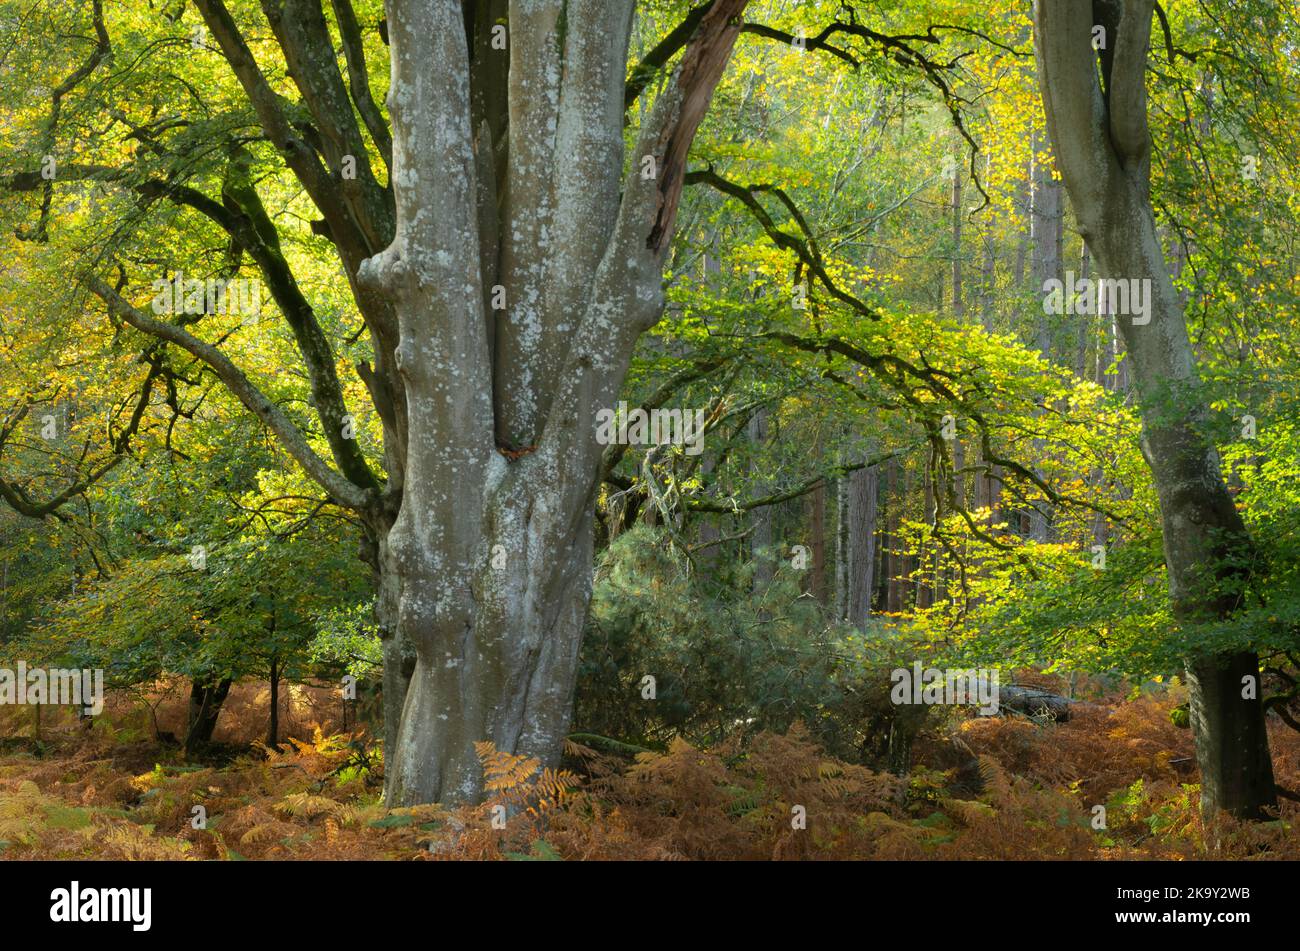 Autumn woodland scene in Bolderwood in the New Forest National Park, Hampshire, England, UK, with ancient beech trees changing colour. Stock Photo